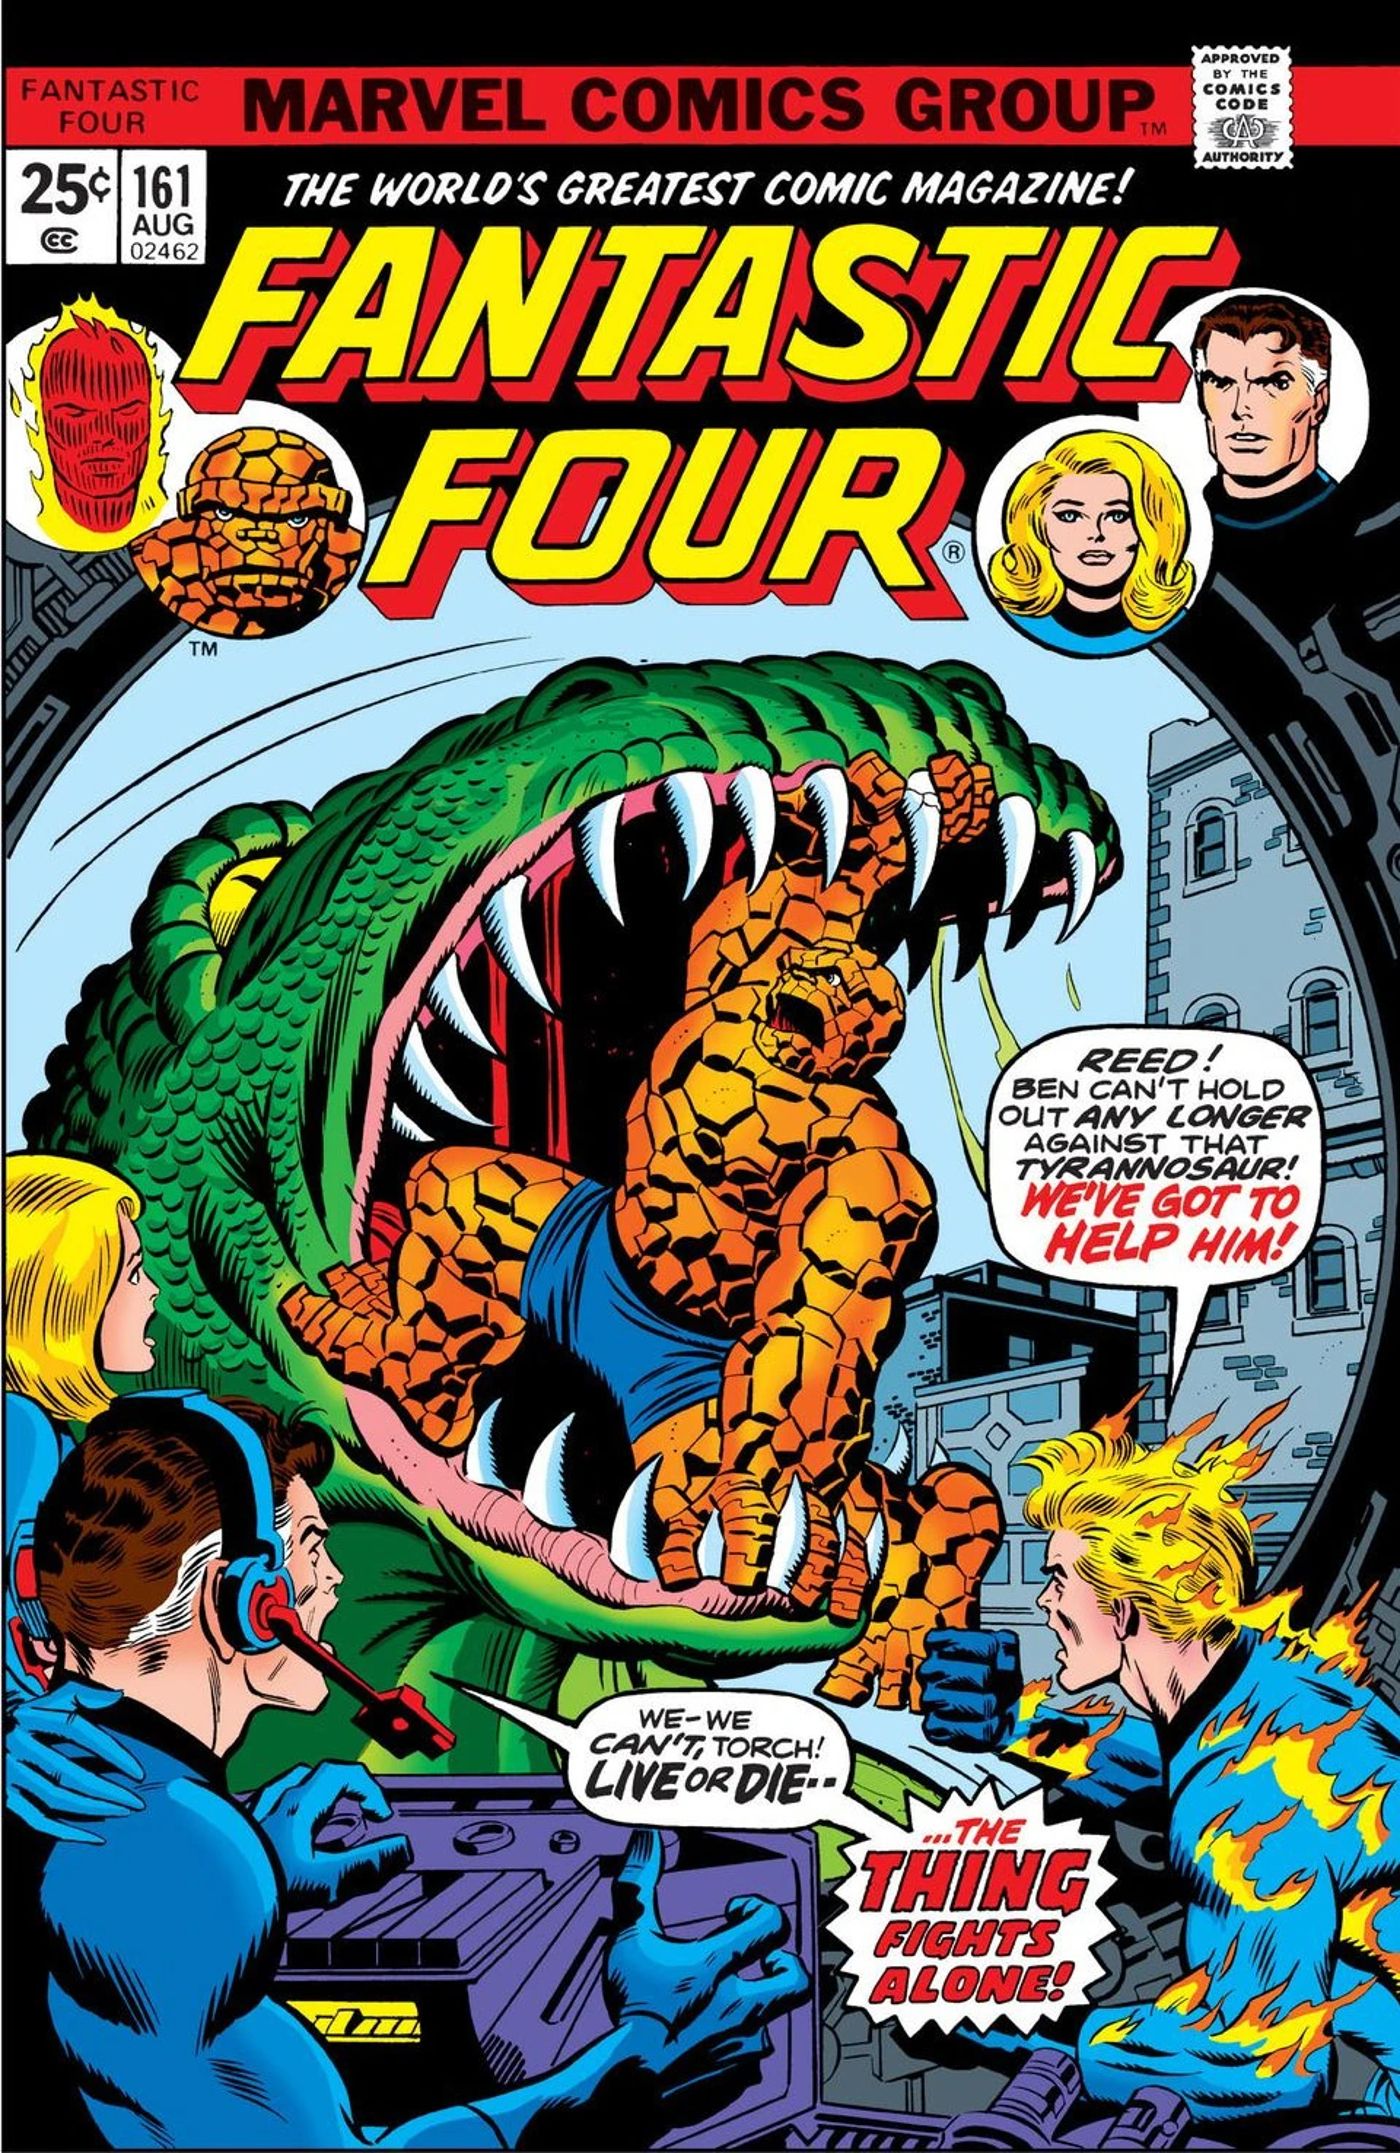 Fantastic Four: This Early Multiverse Story Is the Perfect Way to Bring Marvel’s First Family Into the MCU (Without Doing an Origin Story)